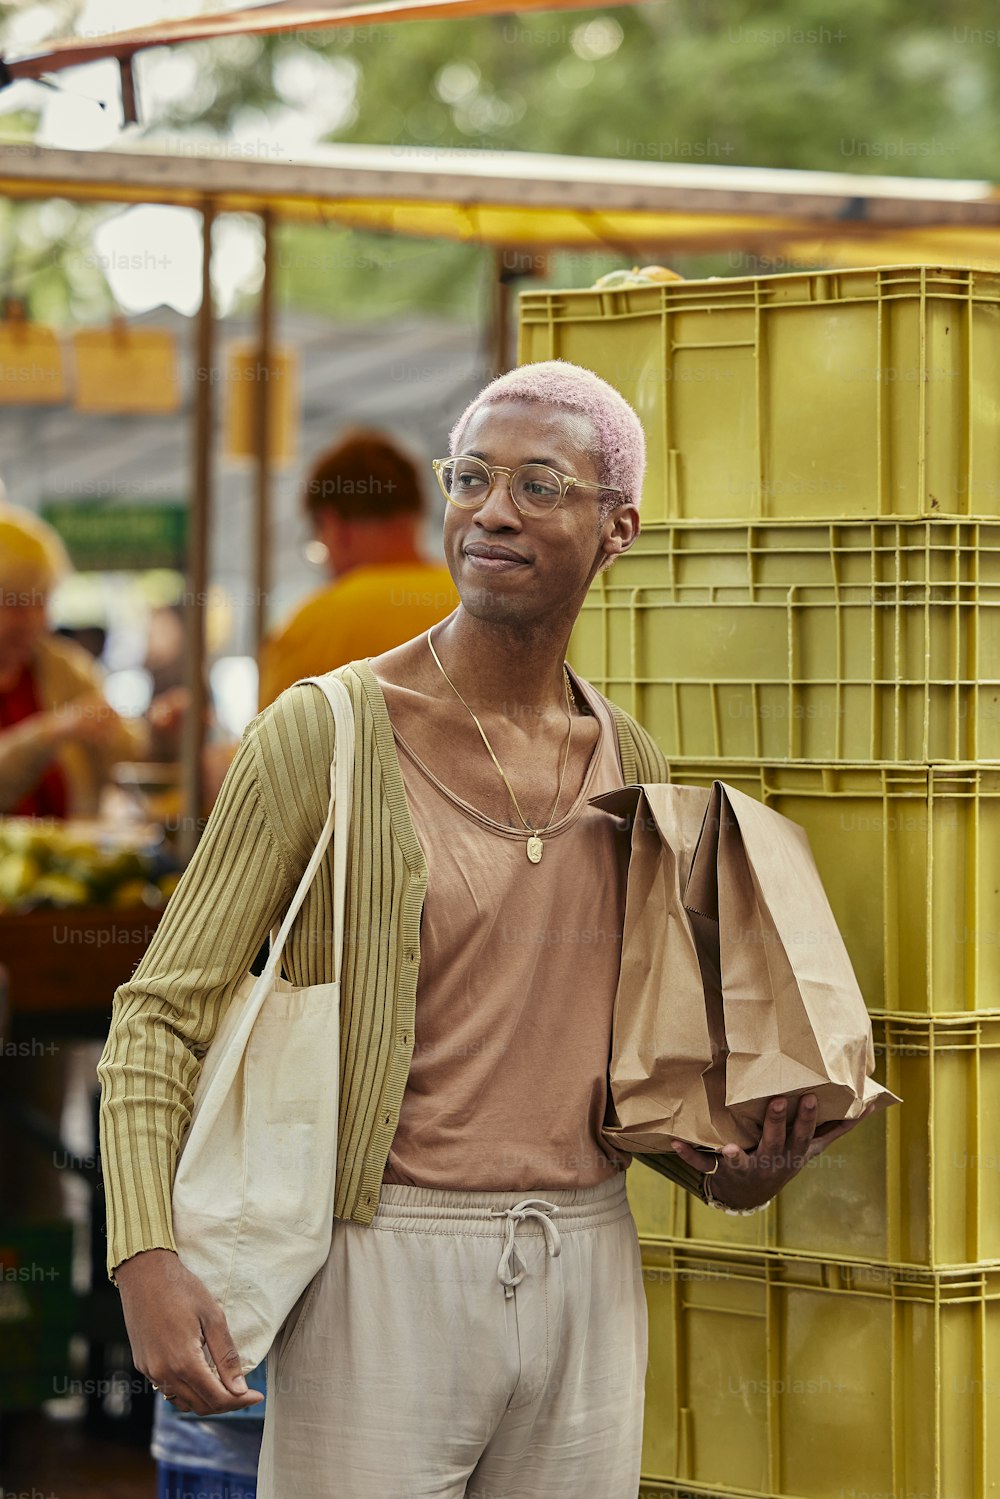 a man with pink hair standing next to a yellow container